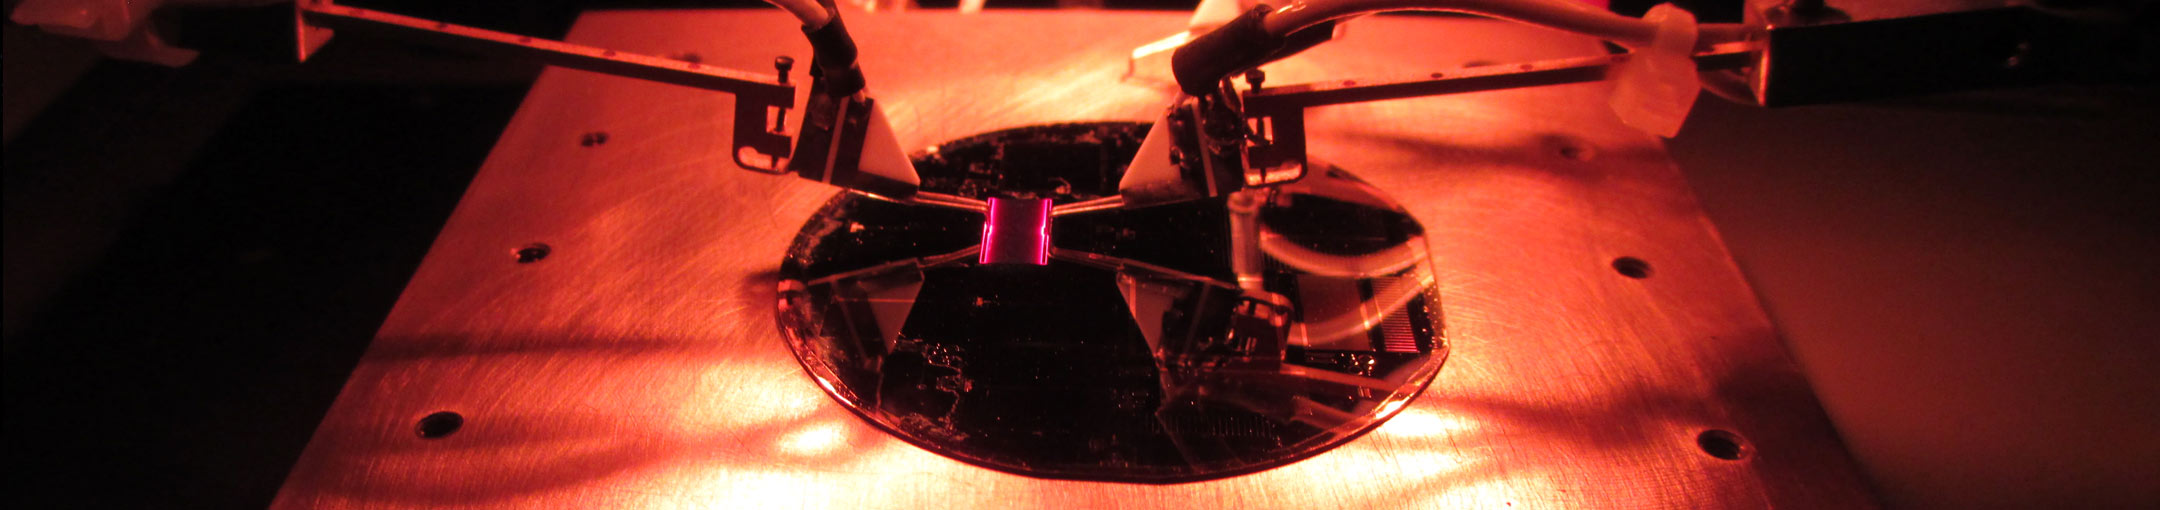 A close-up photo of clamps holding something purple and square over a reflective plate.